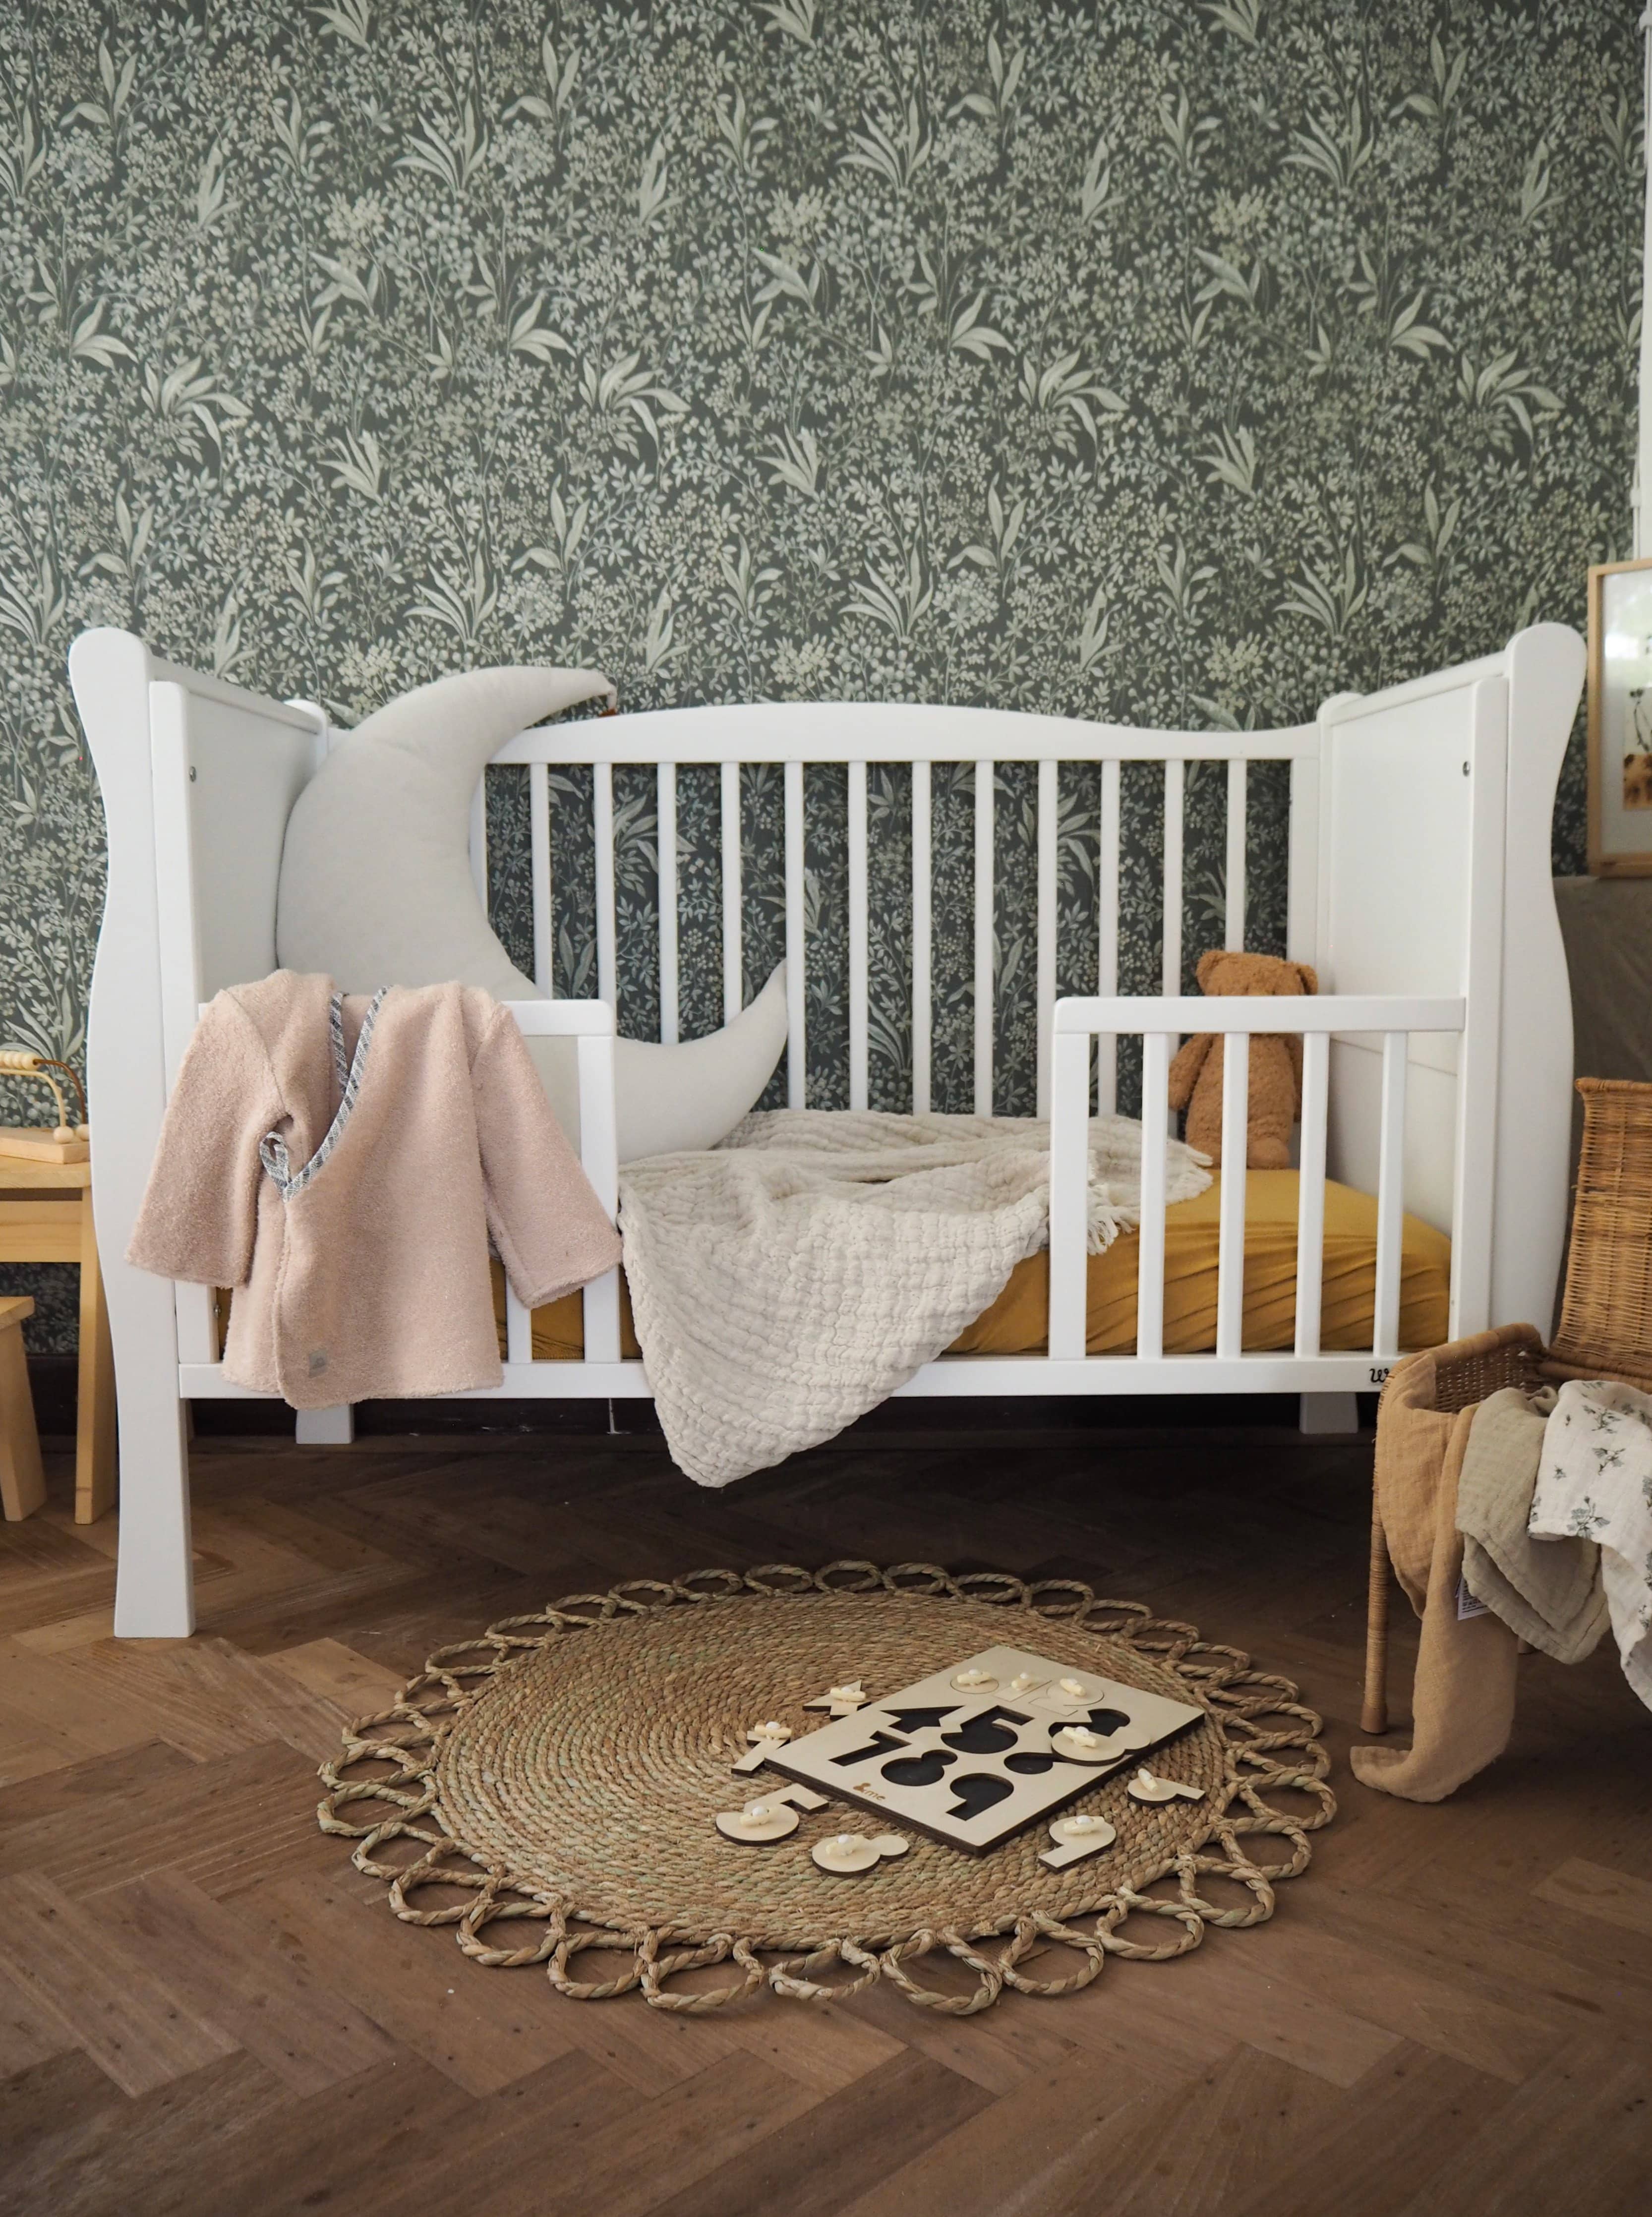 Woodies **Bundle offer** Woodies Noble White Cot + Day bed side + Mattress  - Hola BB